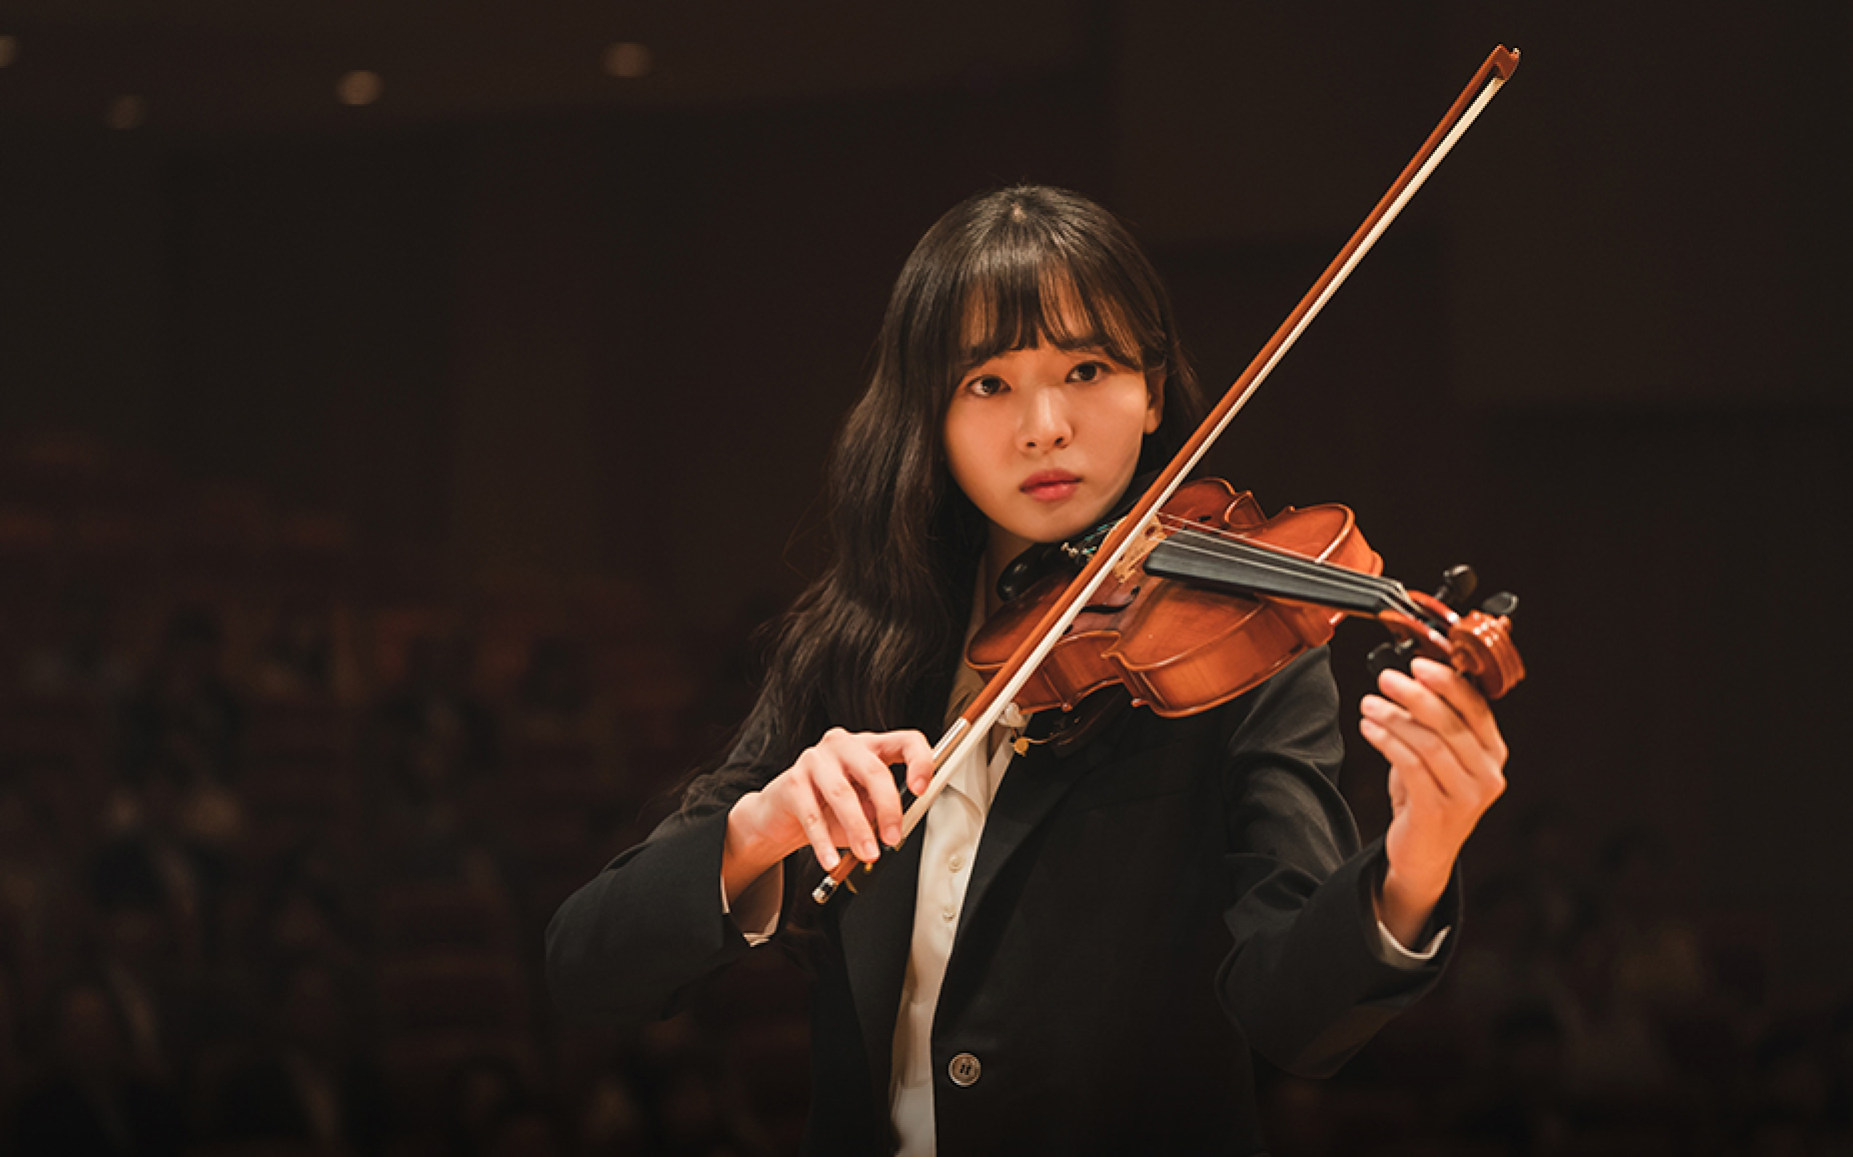 Disney+ K-drama Maestra: Strings of Truth – Lee Young-ae conducts  music-themed melodrama | South China Morning Post